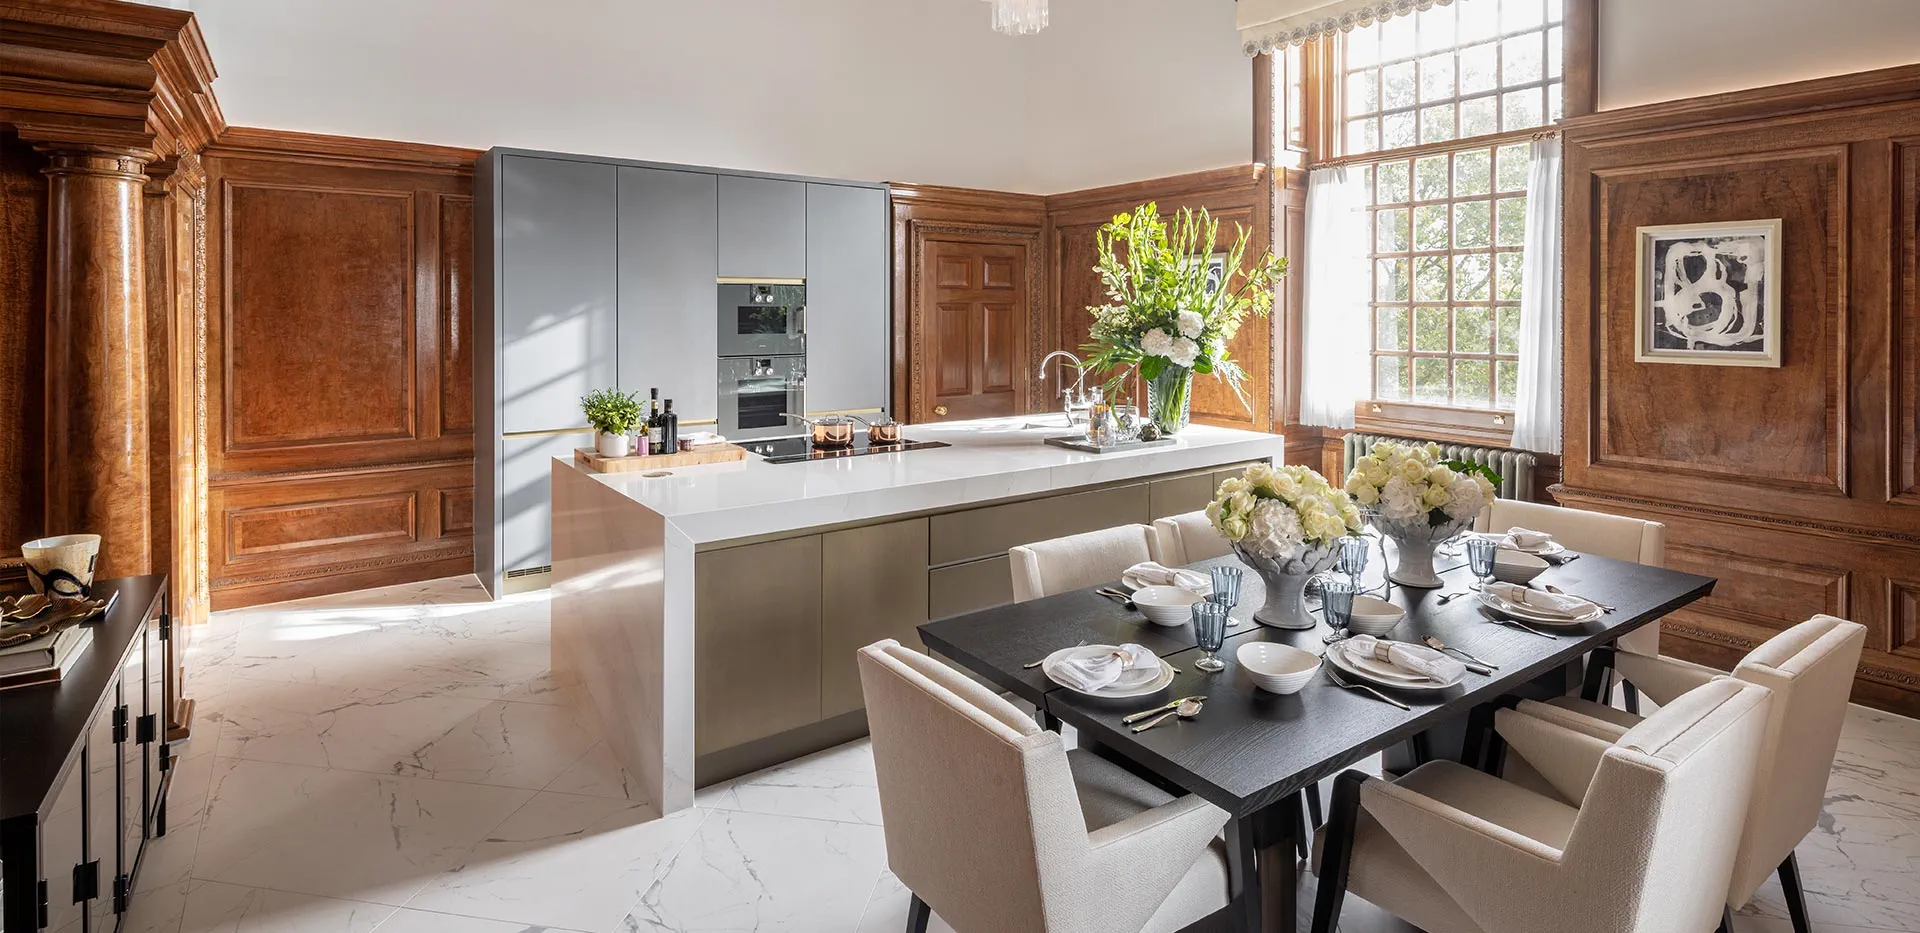 9-millbank_the-gainsborough_kitchen-dining-1